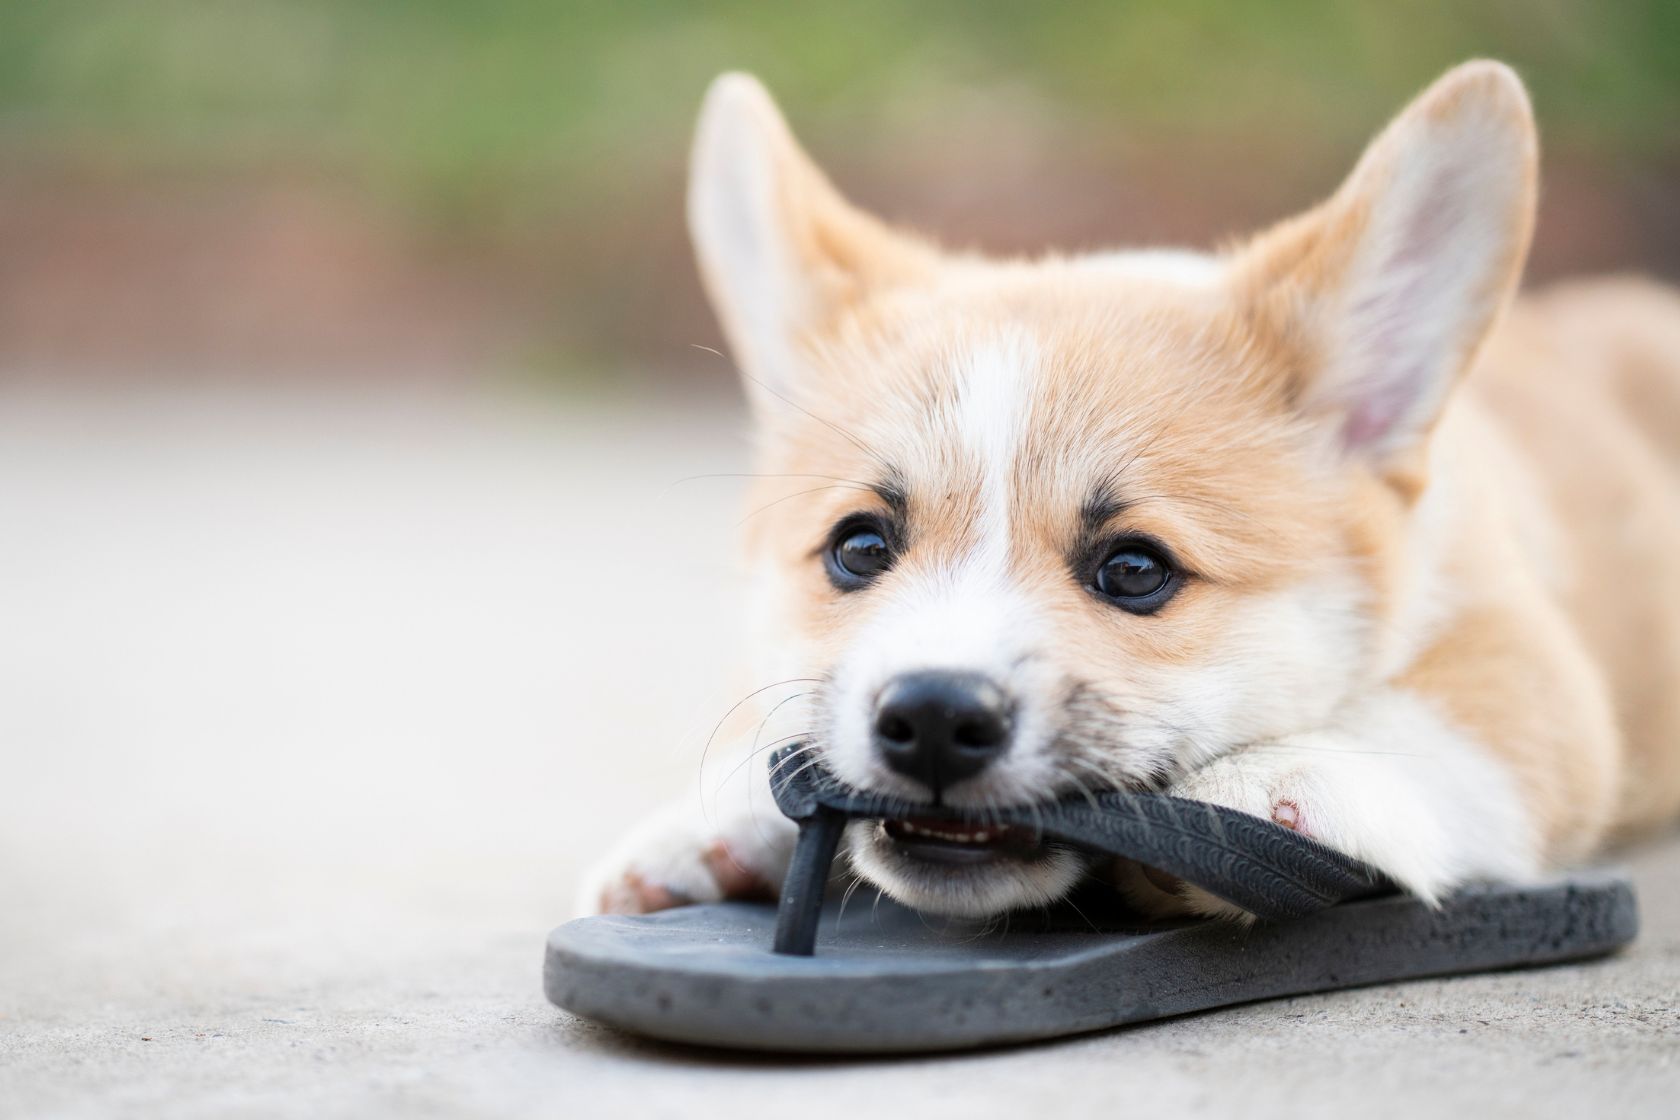 Puppy chewing on a flip flop